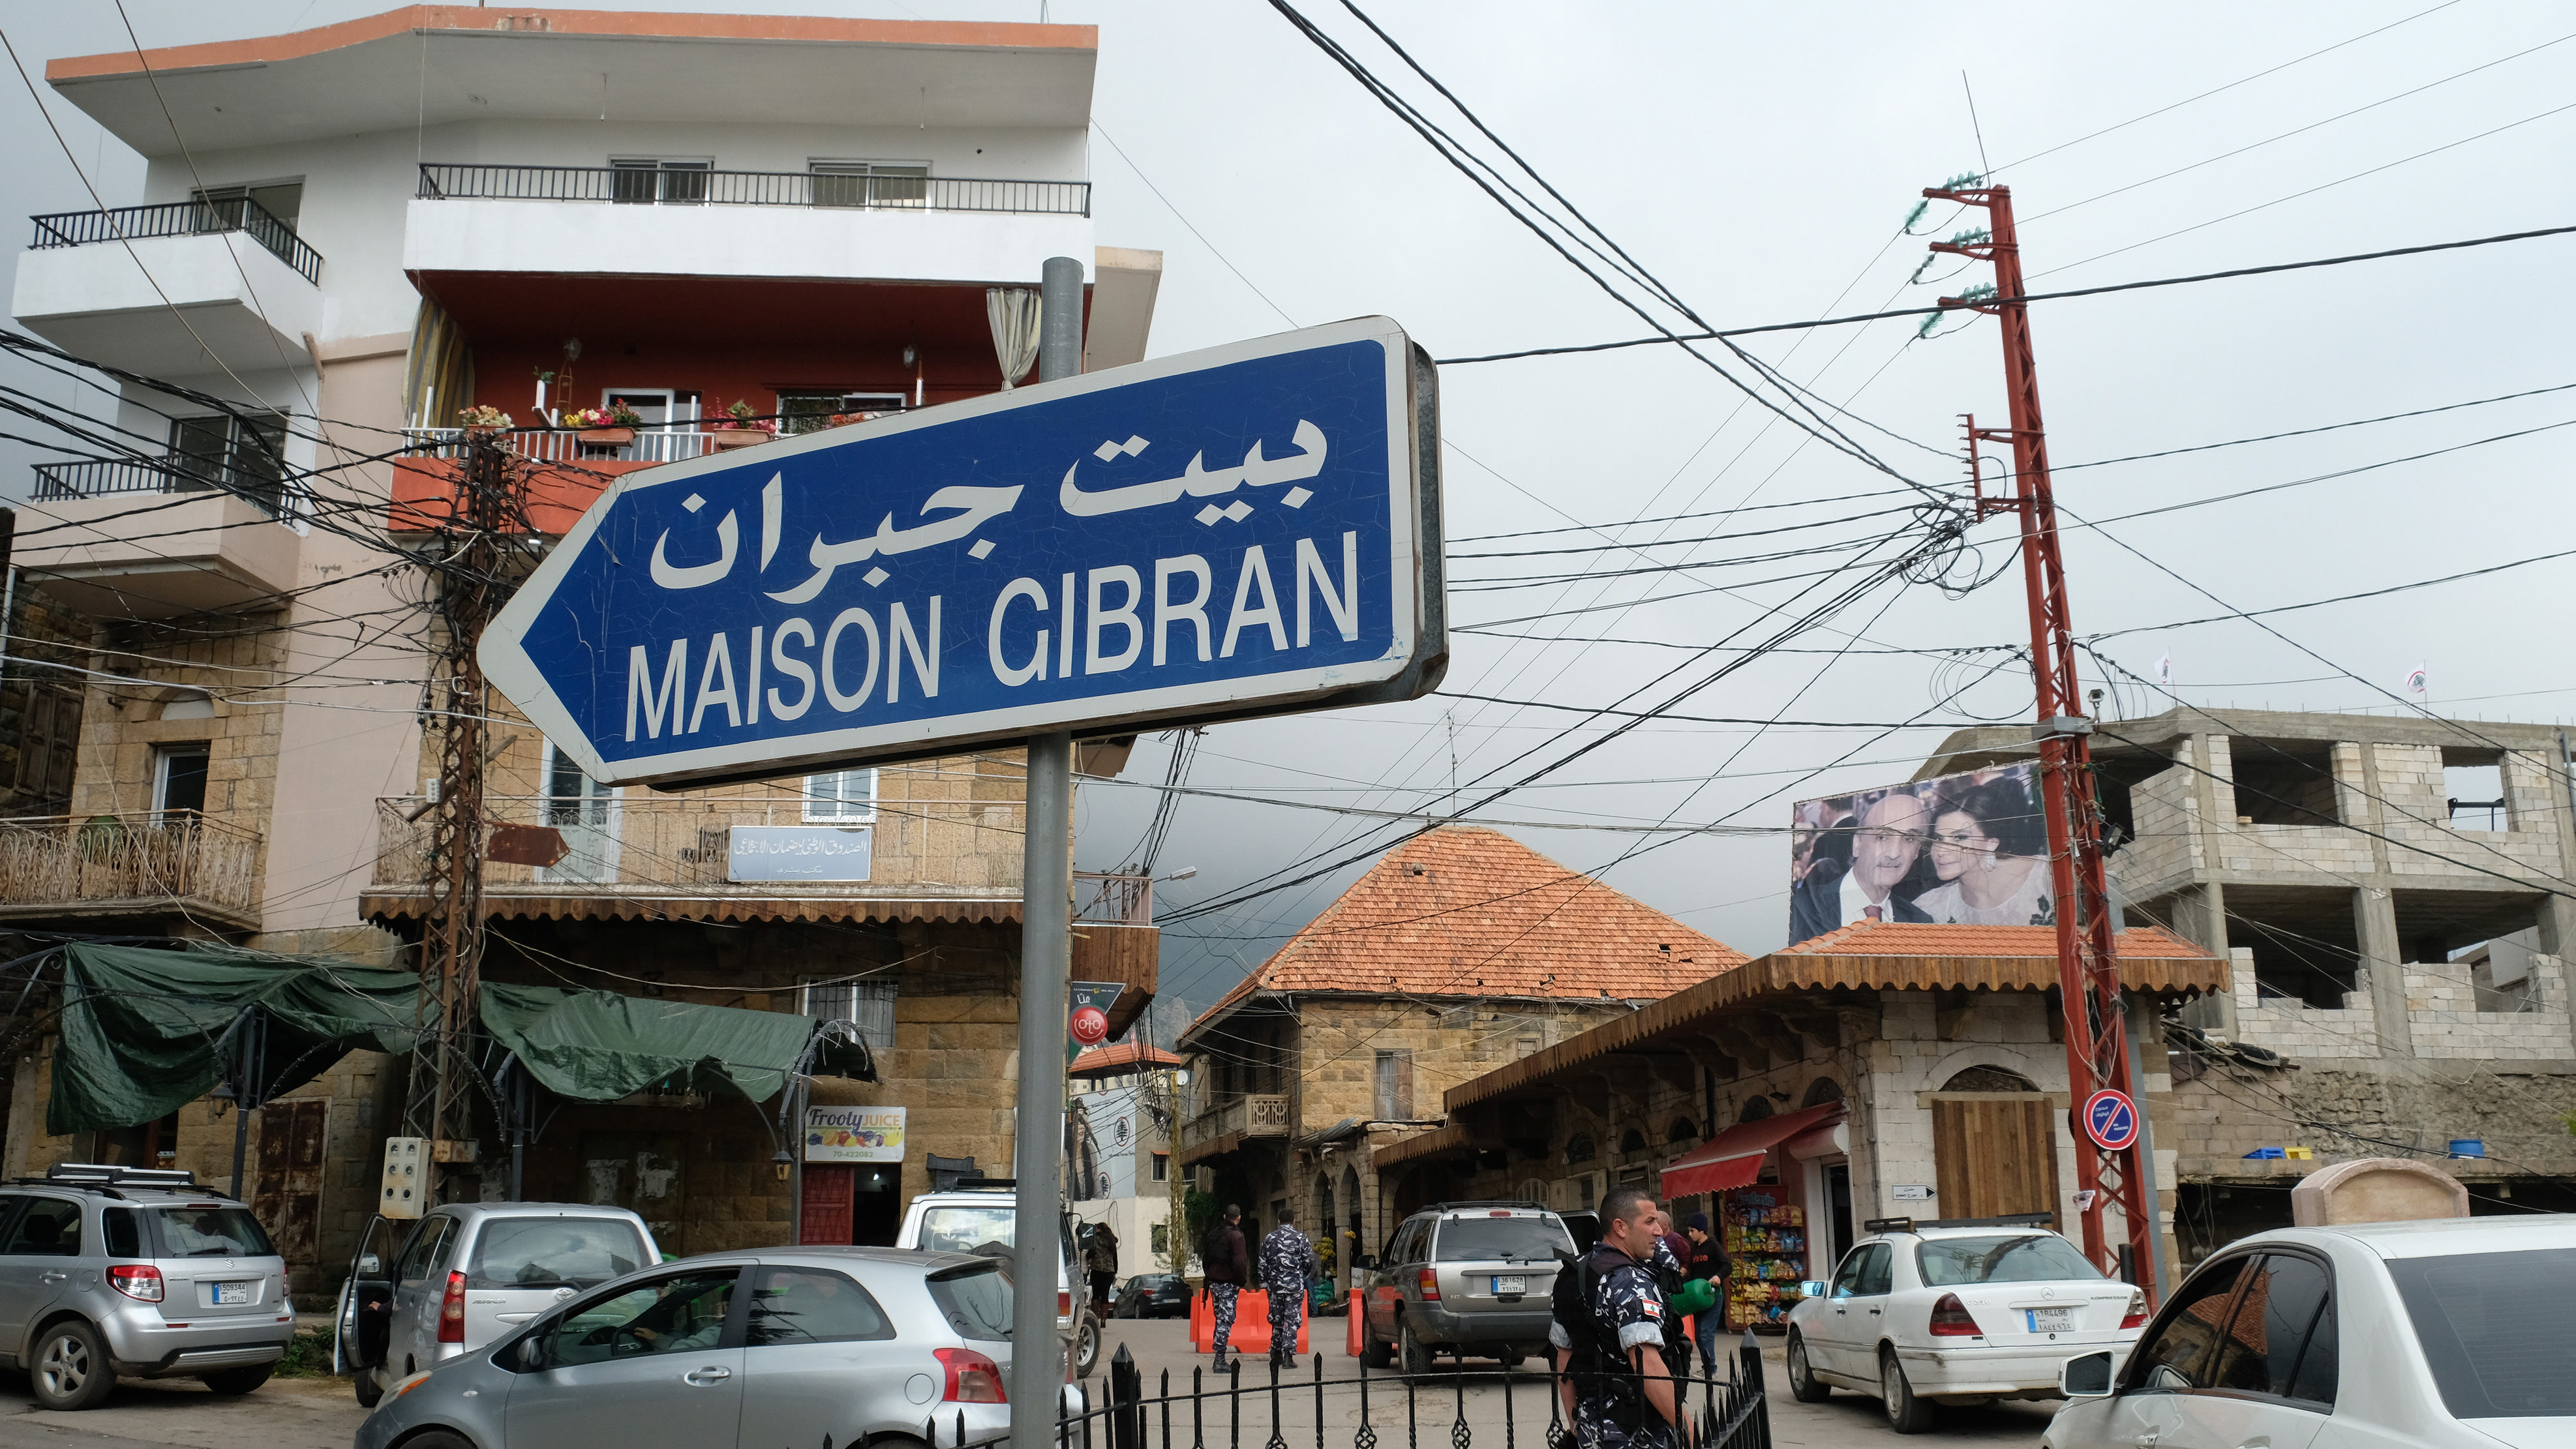 In Defense of the Lebanese People and their Image